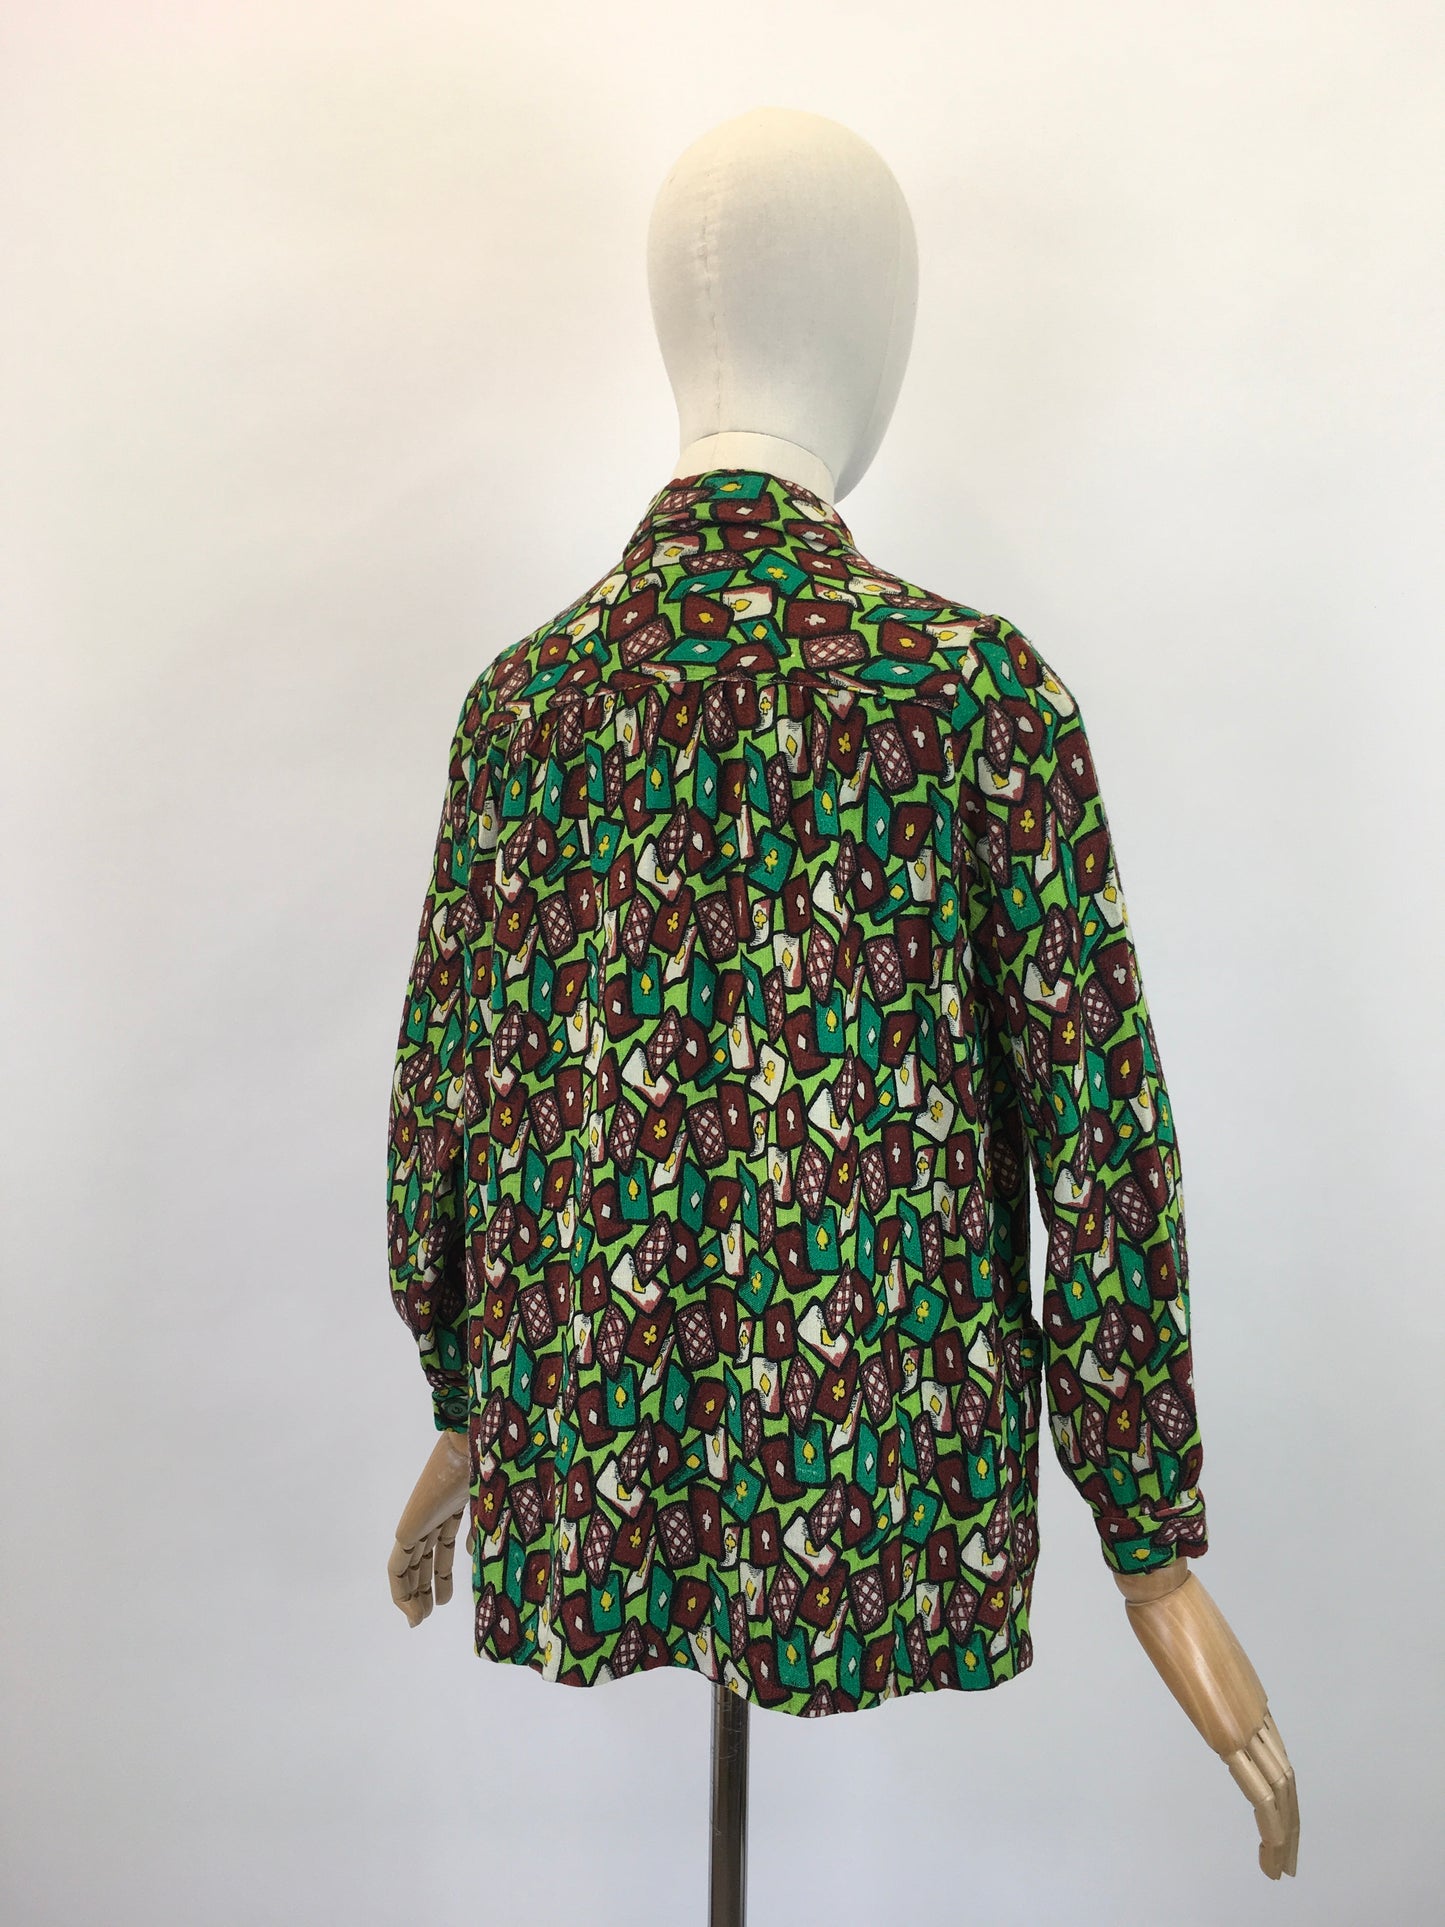 Original 1940's Fabulous Novelty Print ' Playing Cards' Smock - In Chartreuse, Emerald Green, Yellow & Brown